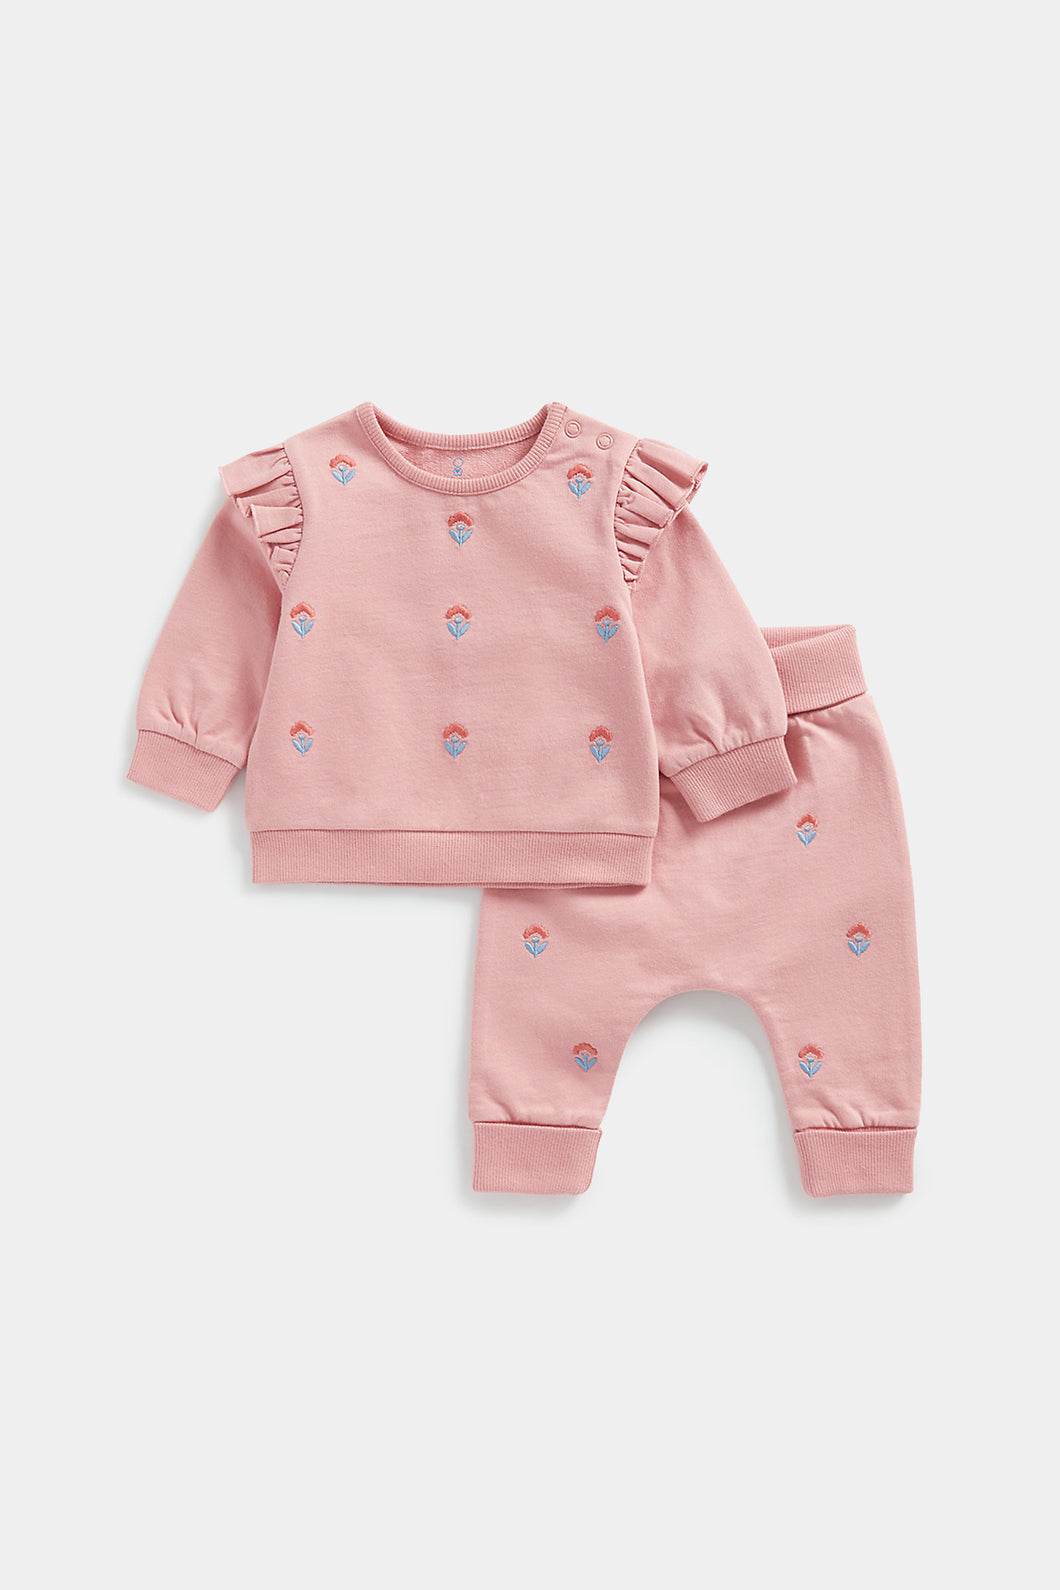 Mothercare Pink Sweat Top and Jogger  Set